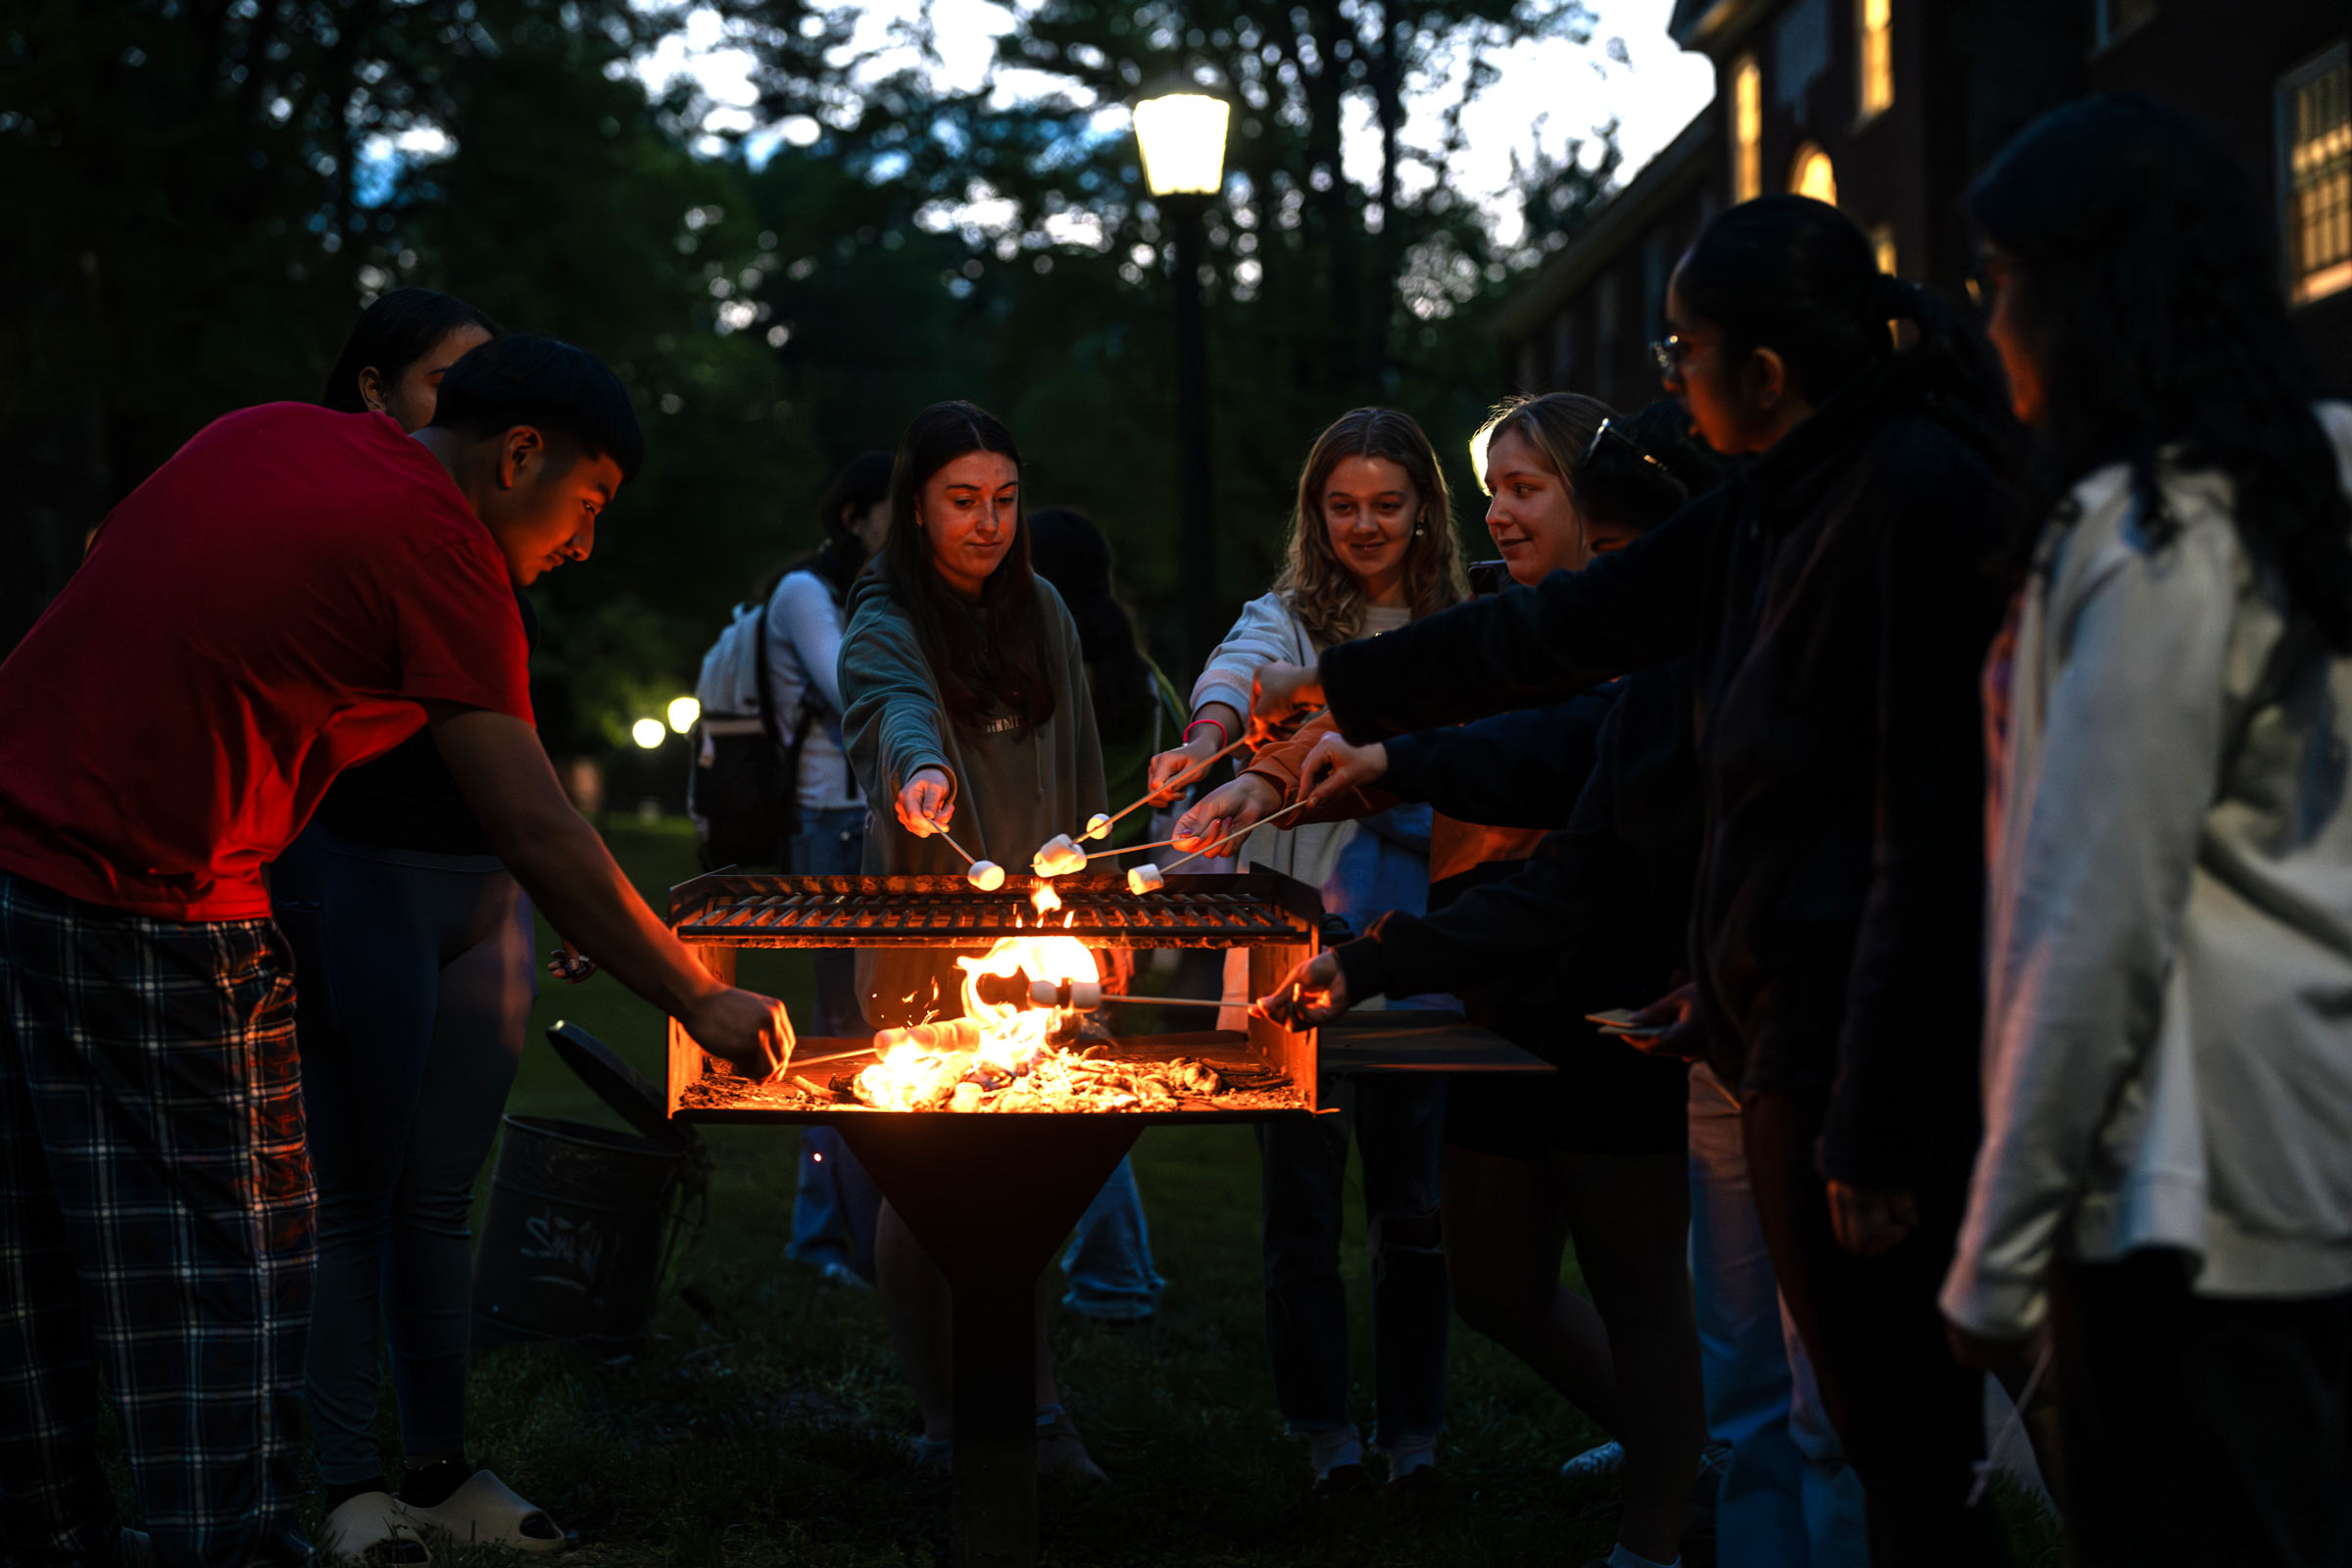 Dao Tran making smores with residents of her community